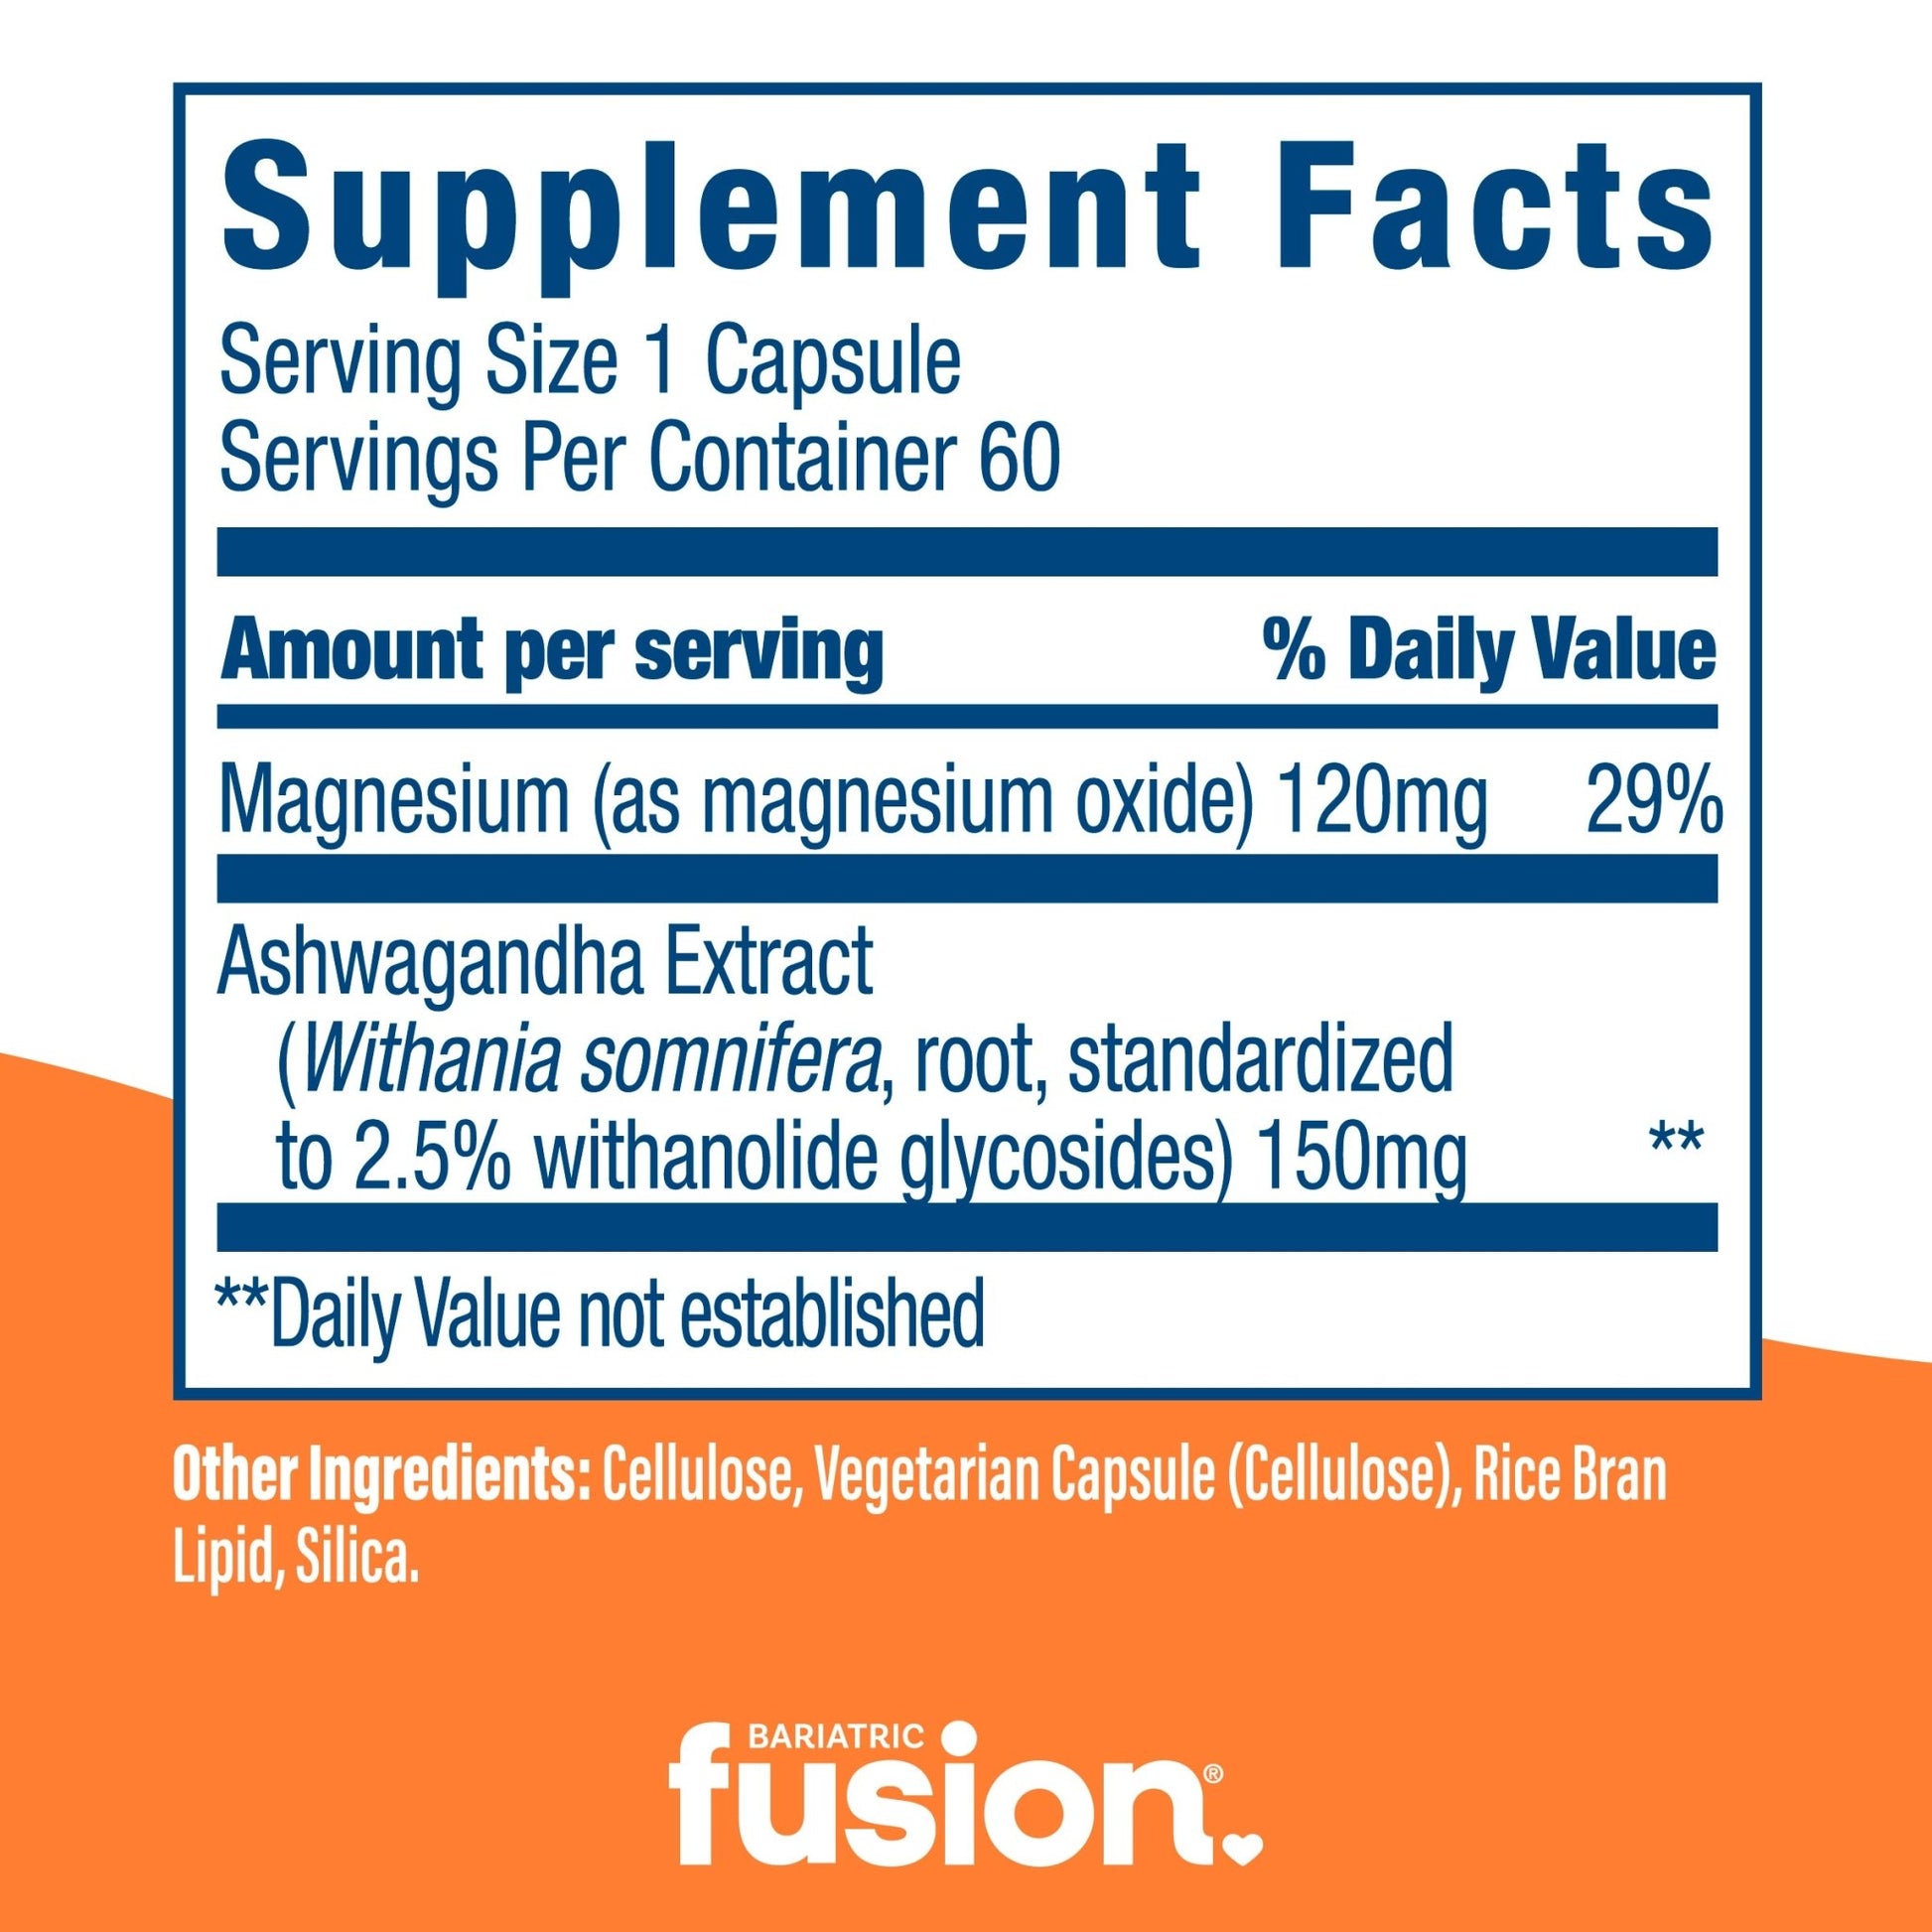 Bariatric Fusion Stress Support supplement facts.